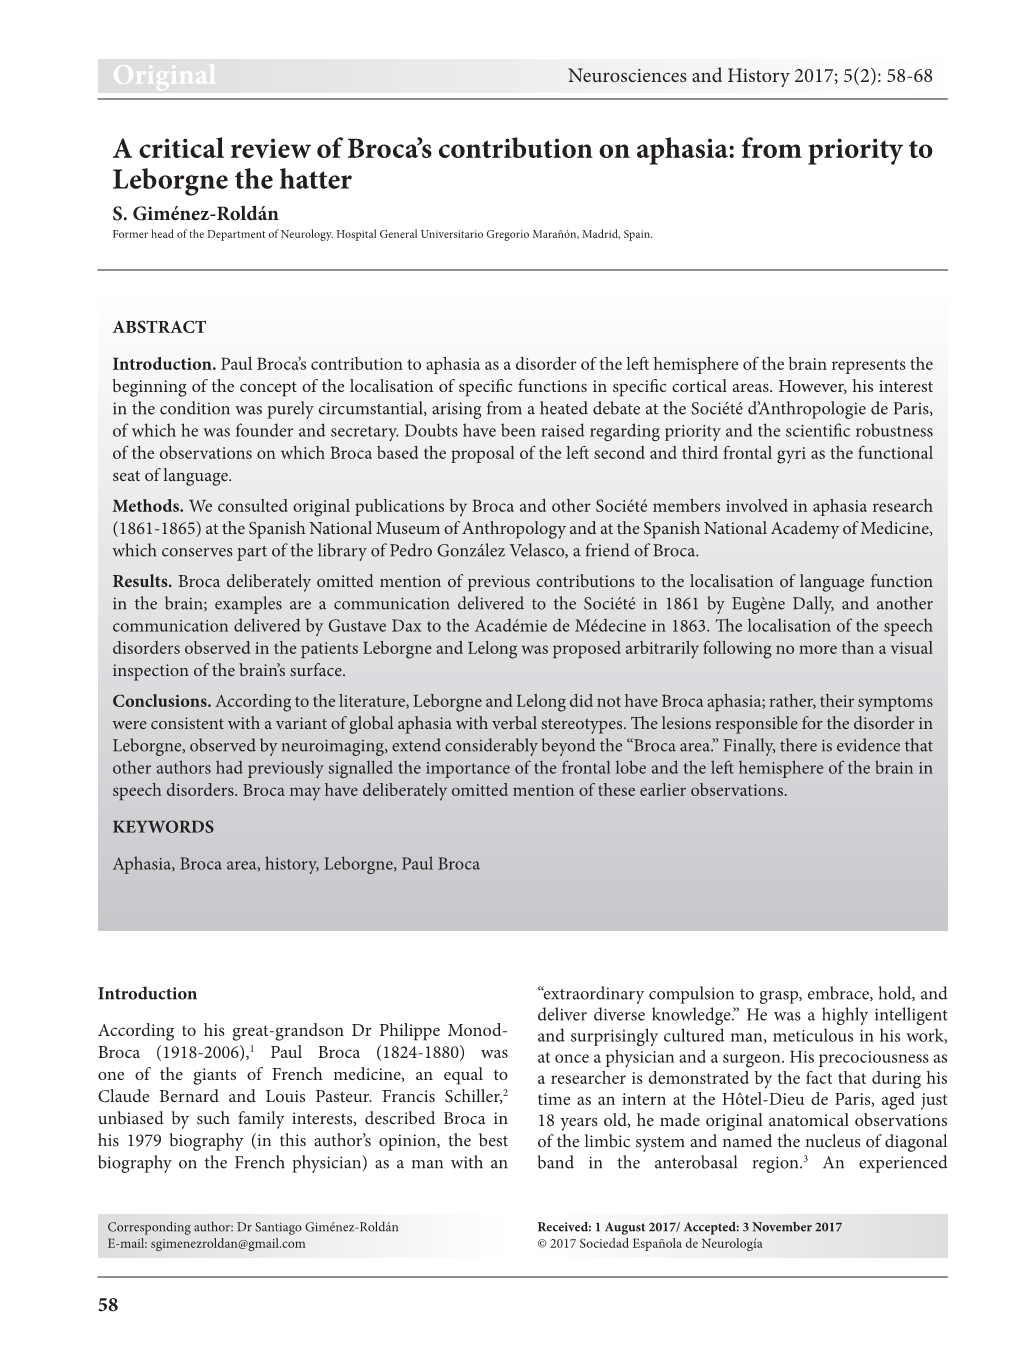 Original a Critical Review of Broca's Contribution on Aphasia: from Priority to Leborgne the Hatter